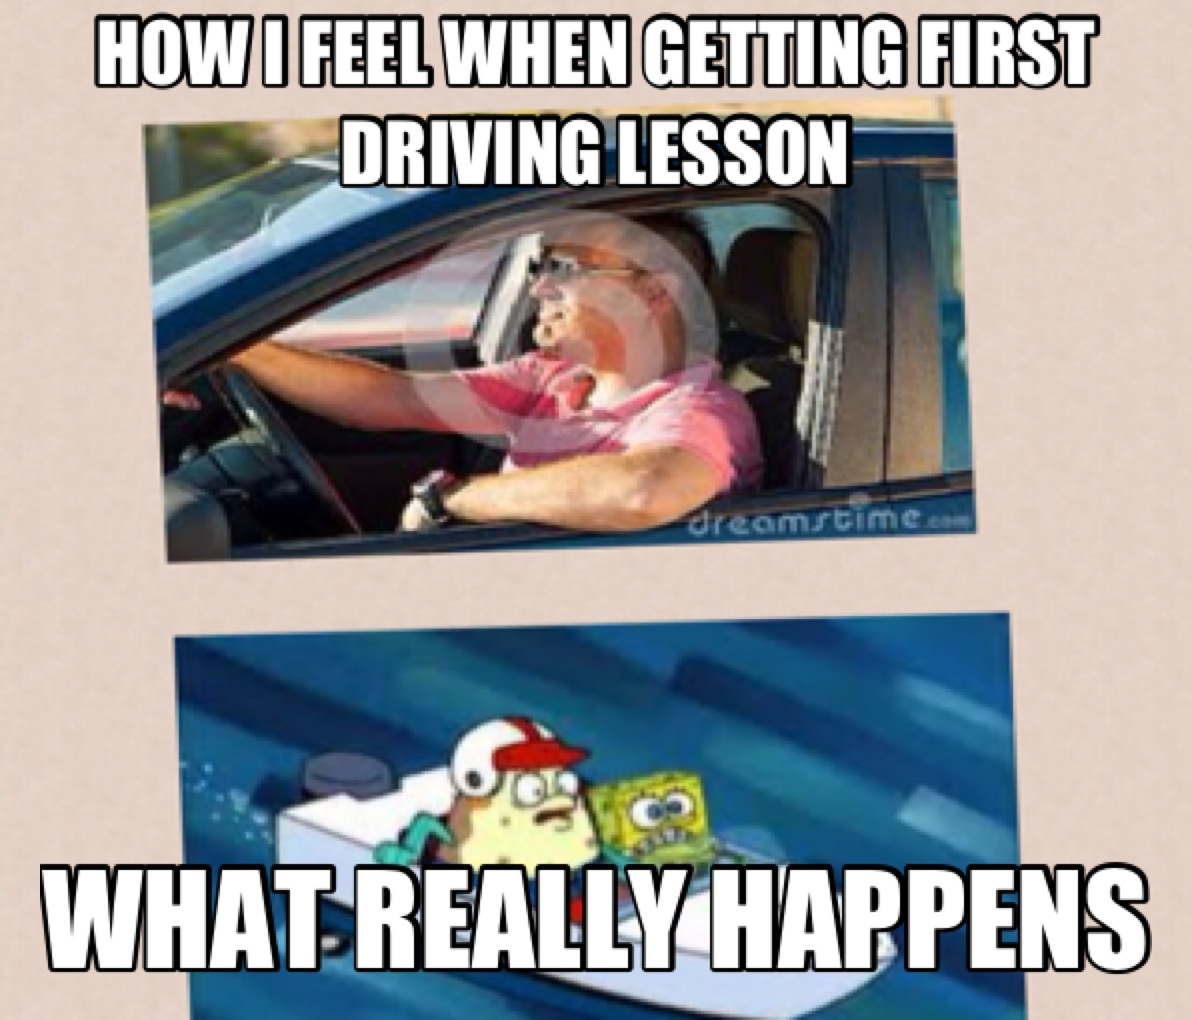 Driving lessons...